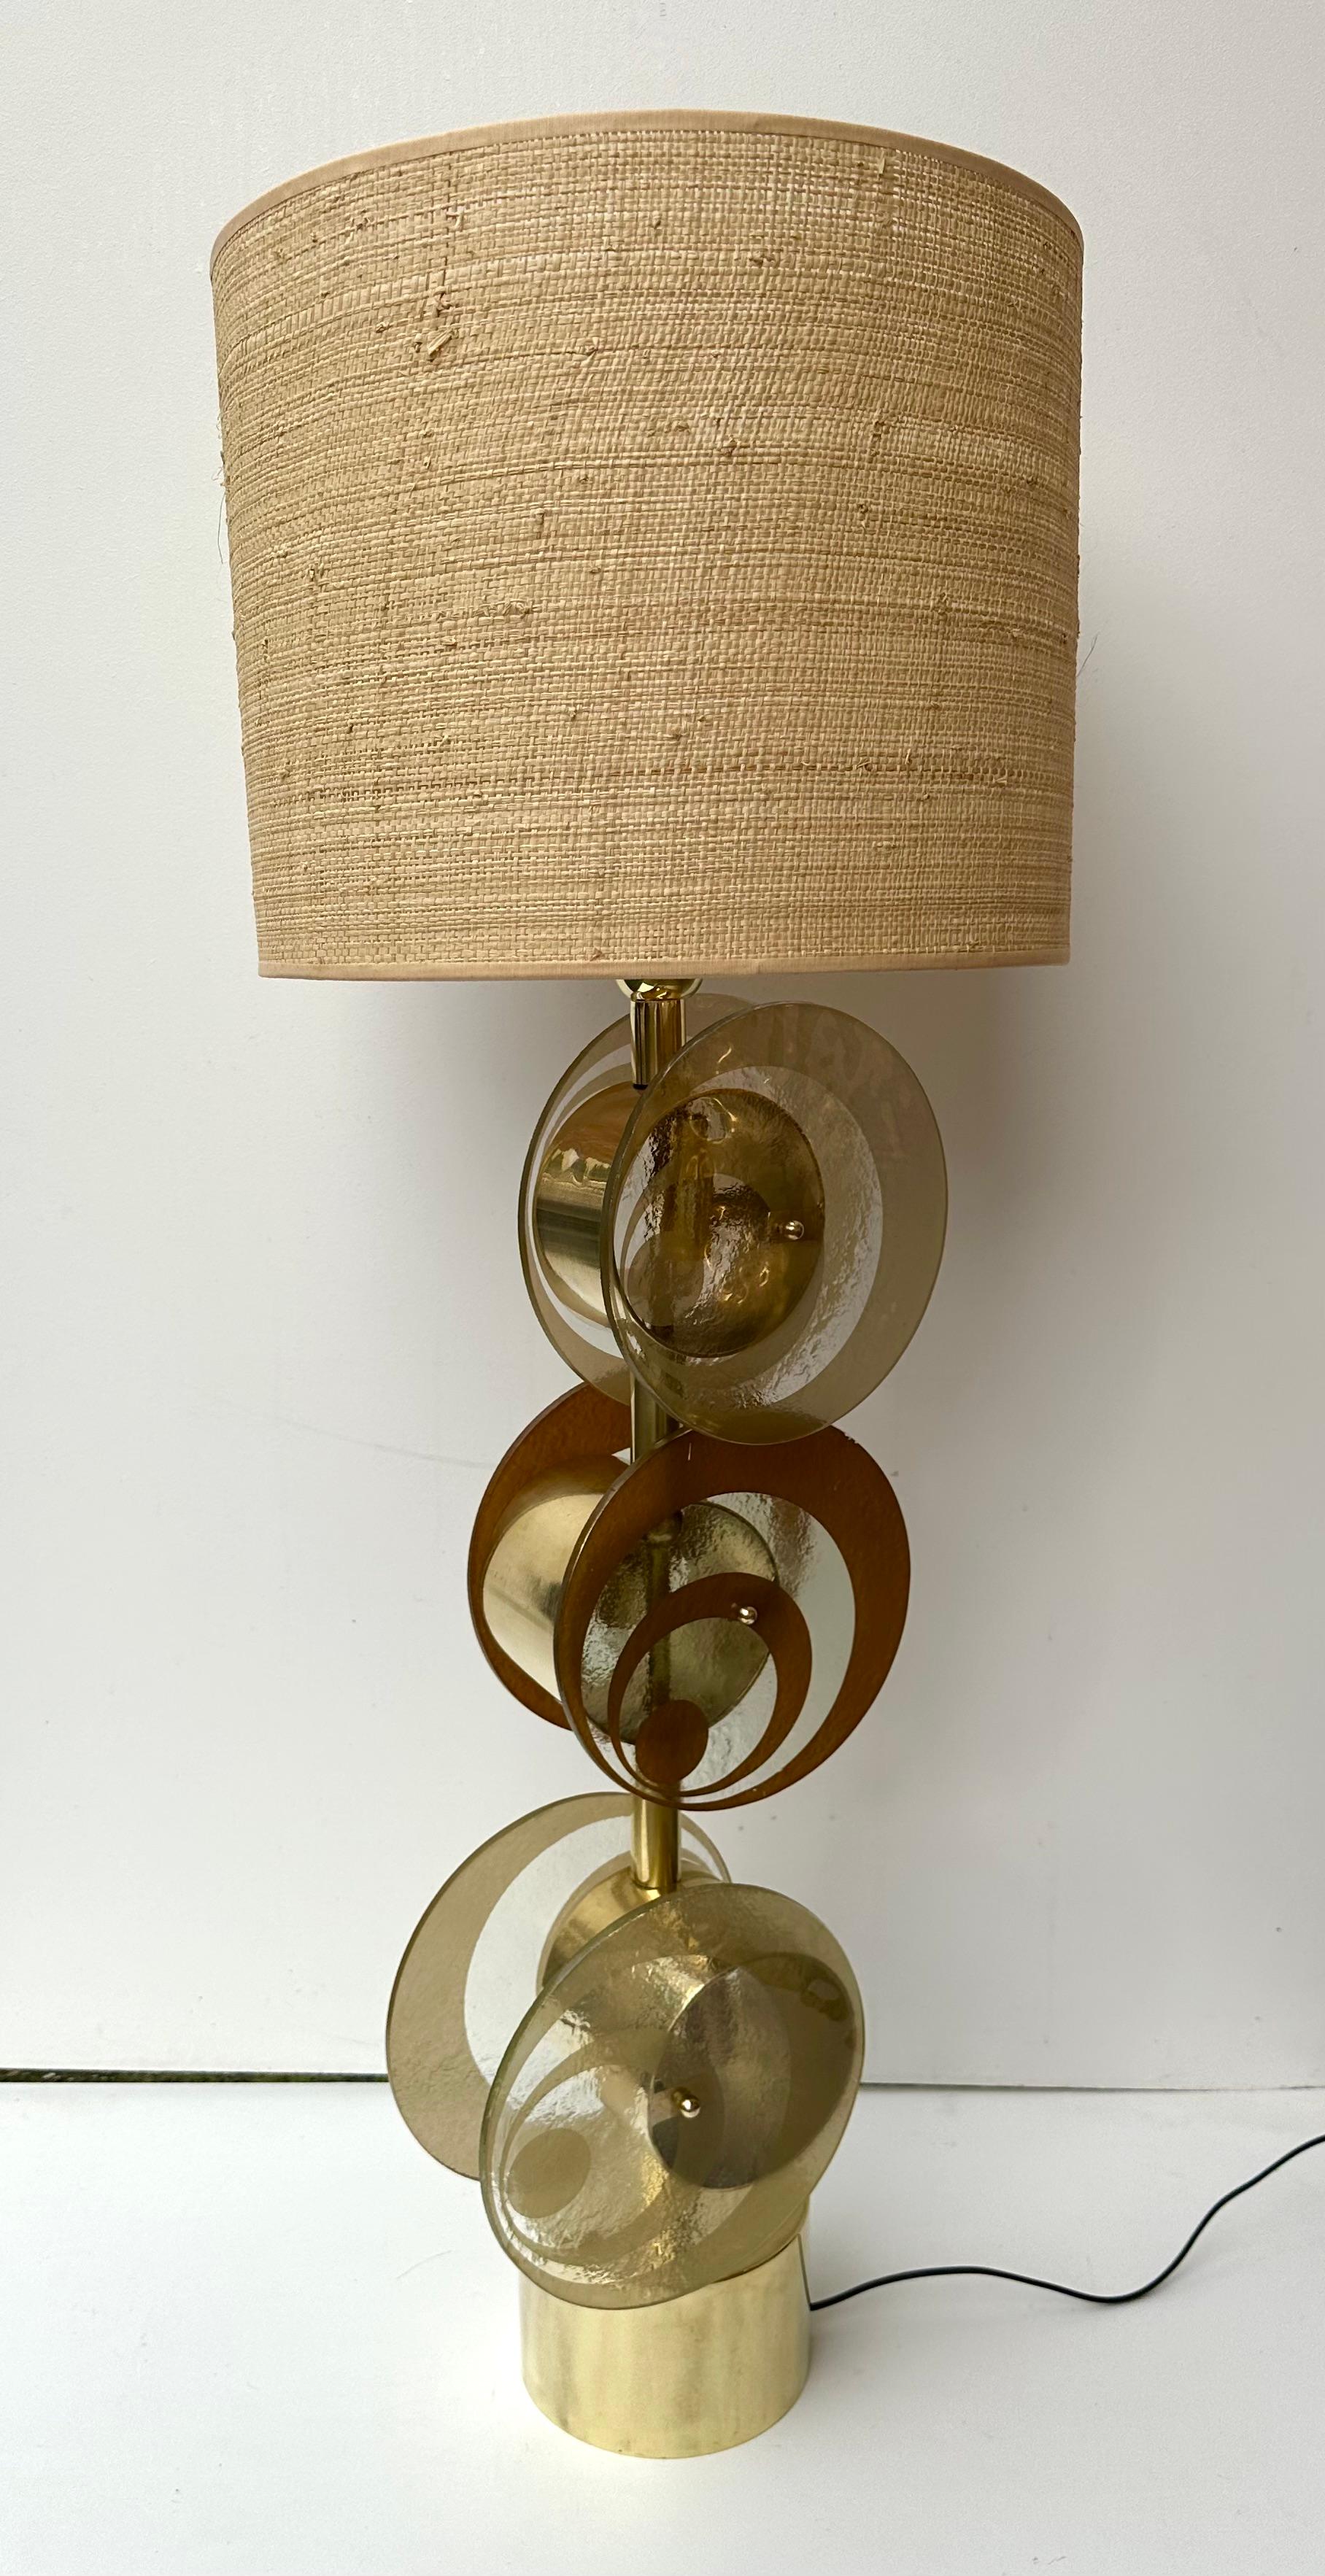 Pair of table or bedside brass lamps and amber tan sand Murano glass spiral discs. Intern lightning center of spiral discs. Contemporary work from a small italian artisanal workshop in a Mid-Century Modern Space Age Hollywood Regency mood.

Demo